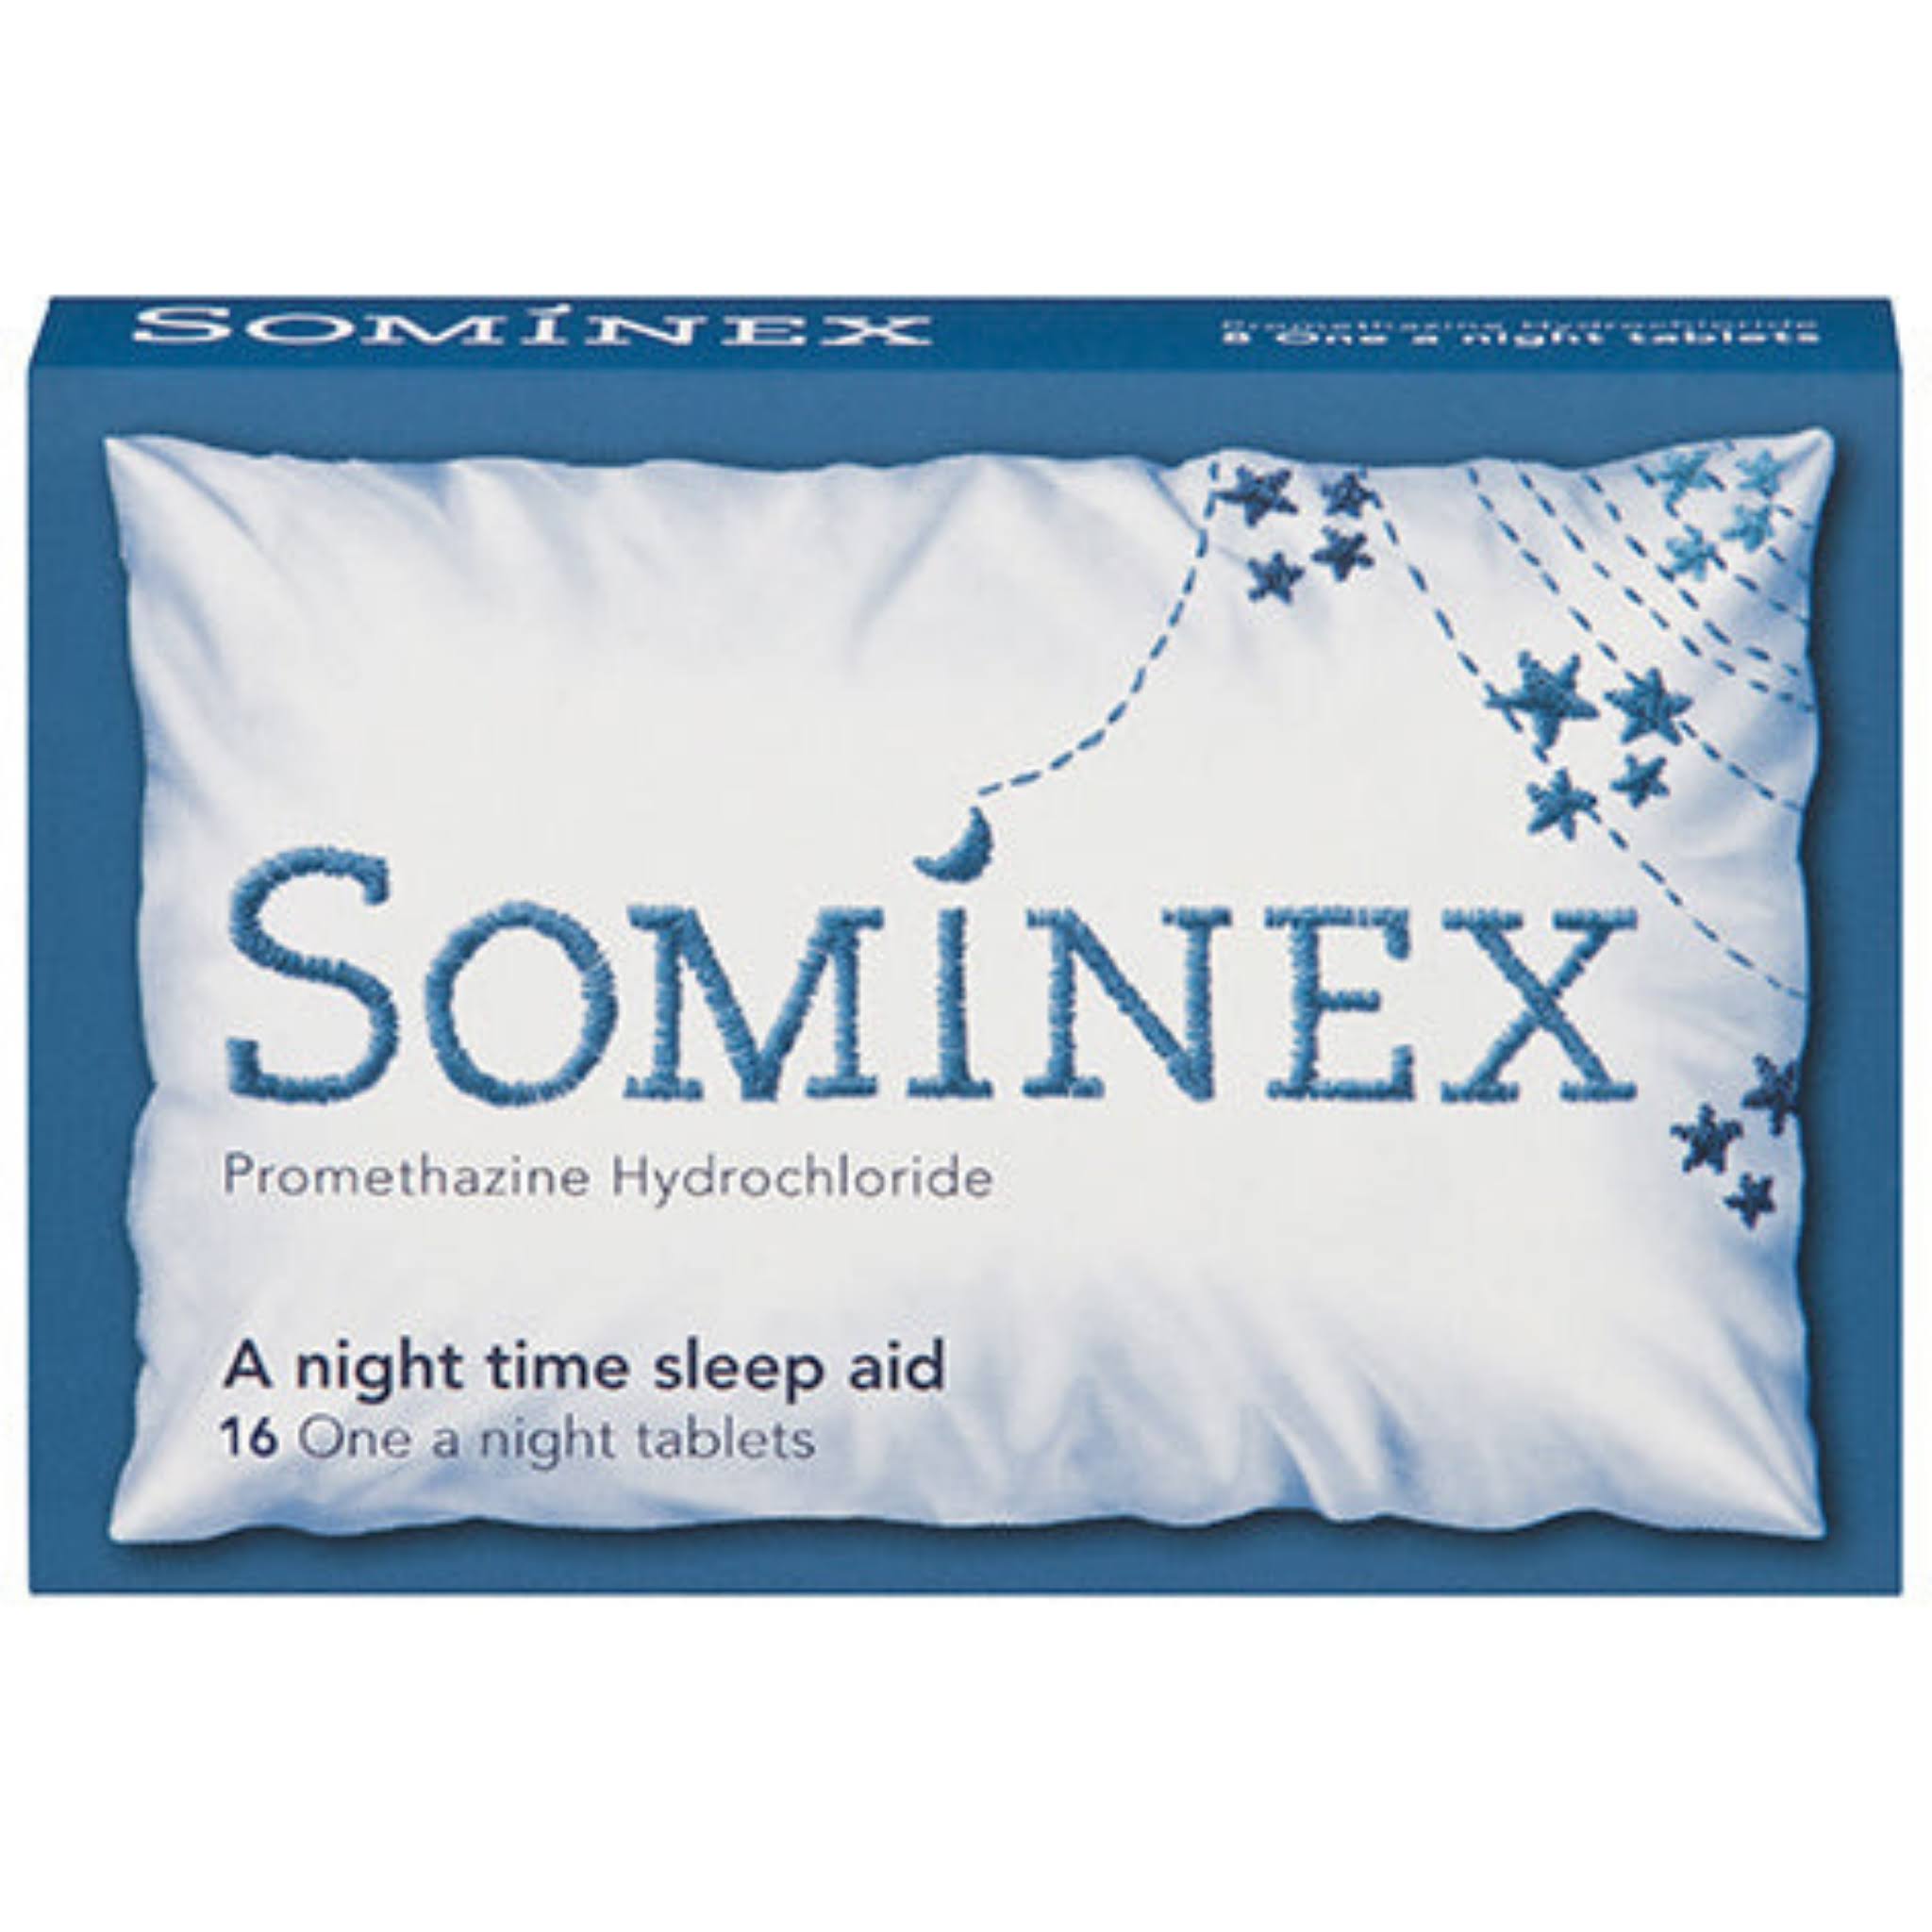 Sominex Promethazine One a Night Tablets - 16ct